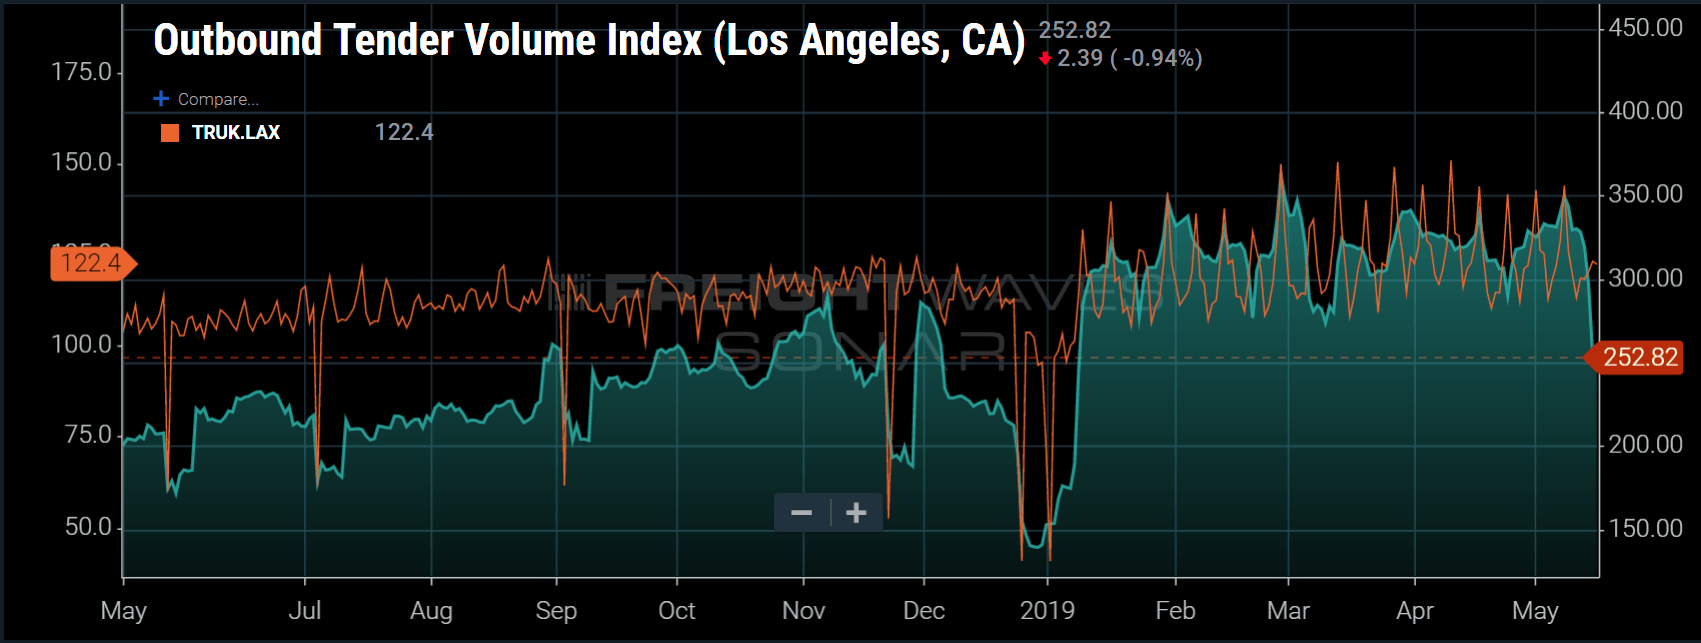 After a booming first four months of 2019 in Los Angeles, volumes plummet after tariff increase faster than trucks can exit the market. (SONAR Outbound Tender Volume Index, Trucks-in-Market – Los Angeles OTVI.LAX, TRUK.LAX)